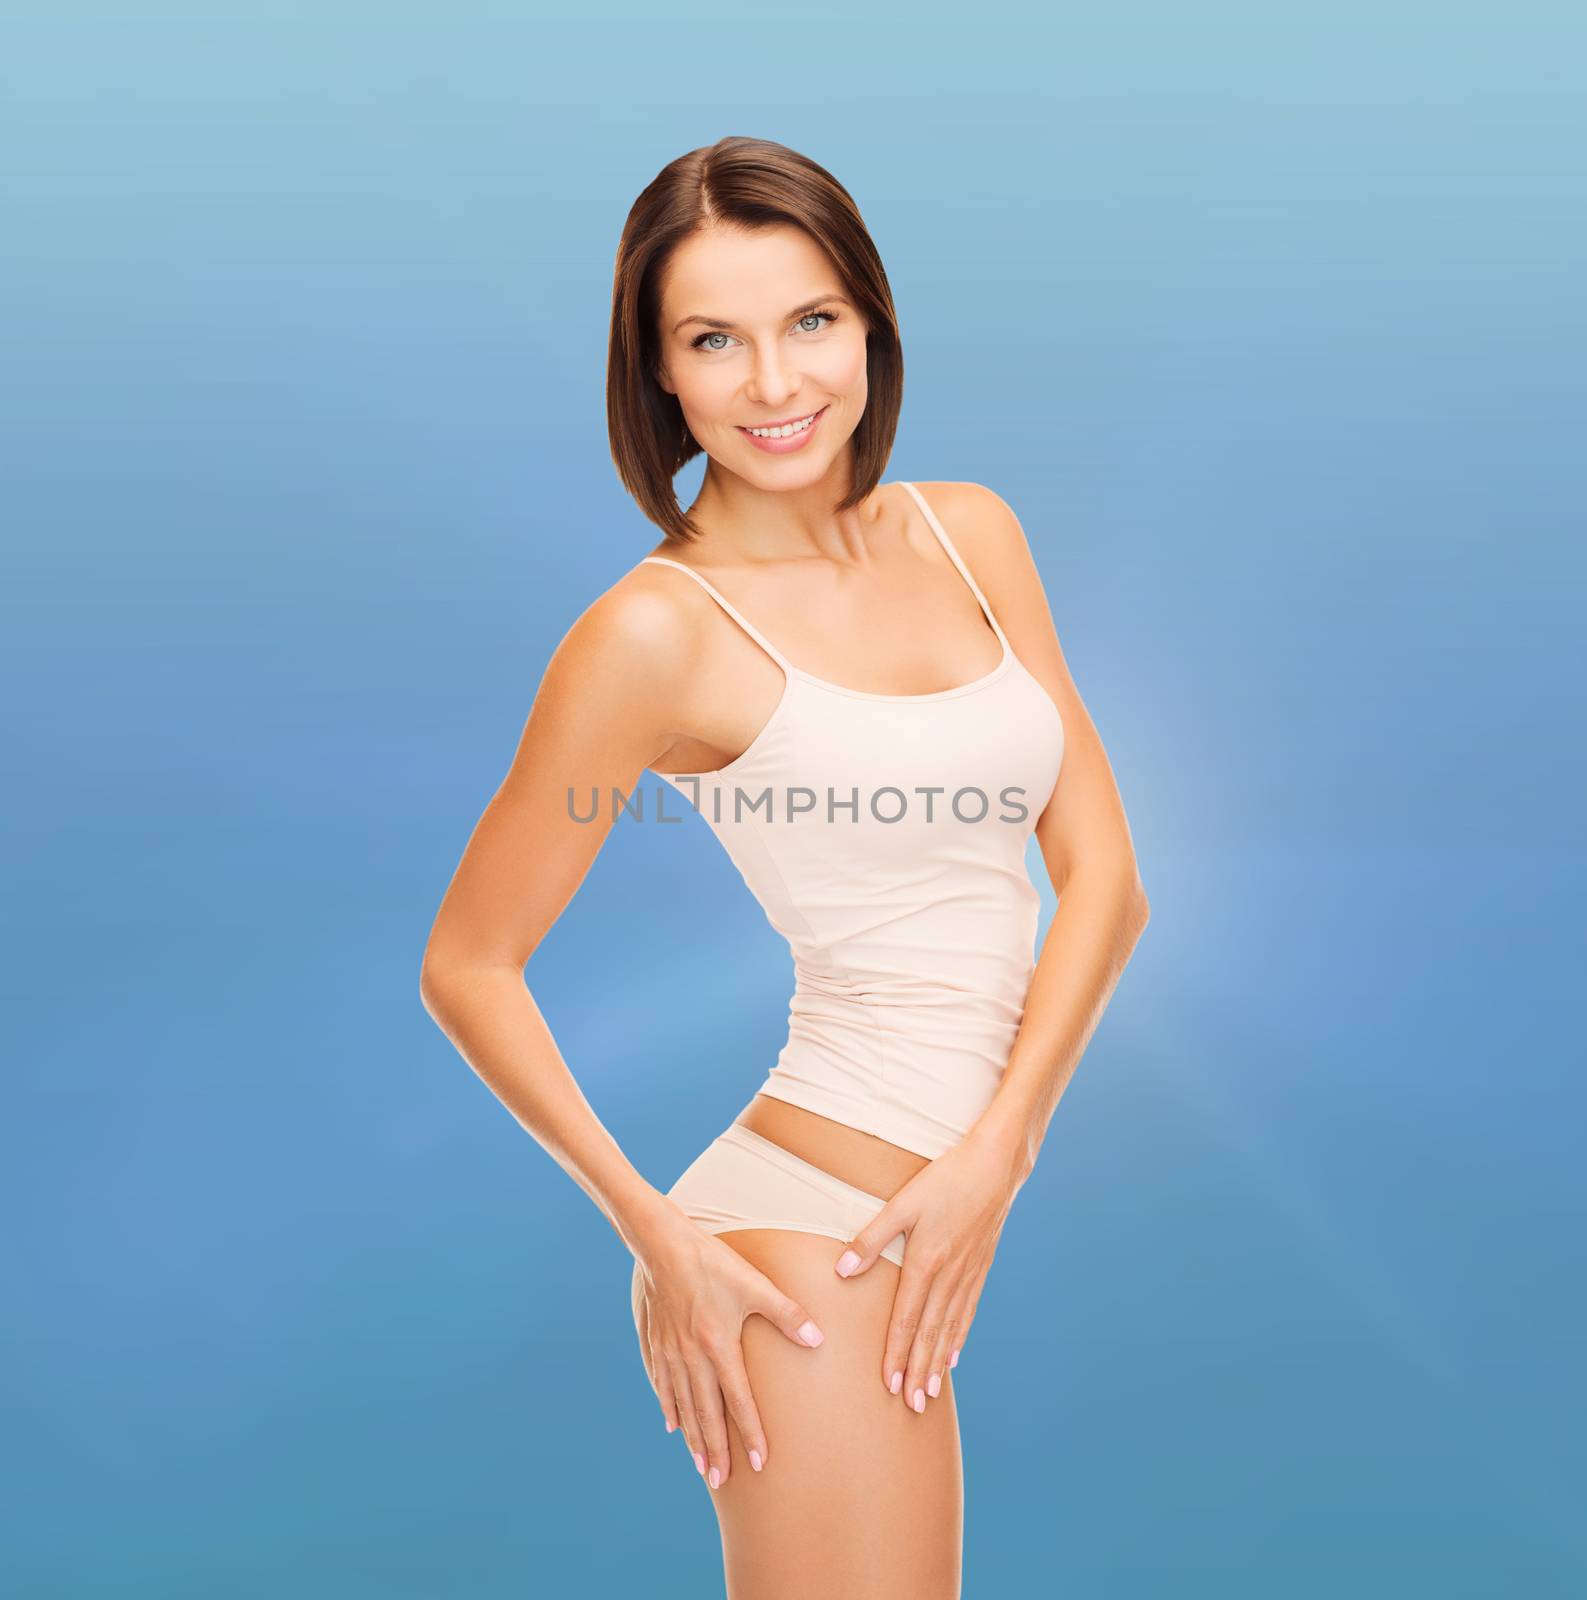 health and beauty - woman in cotton underwear showing slimming concept